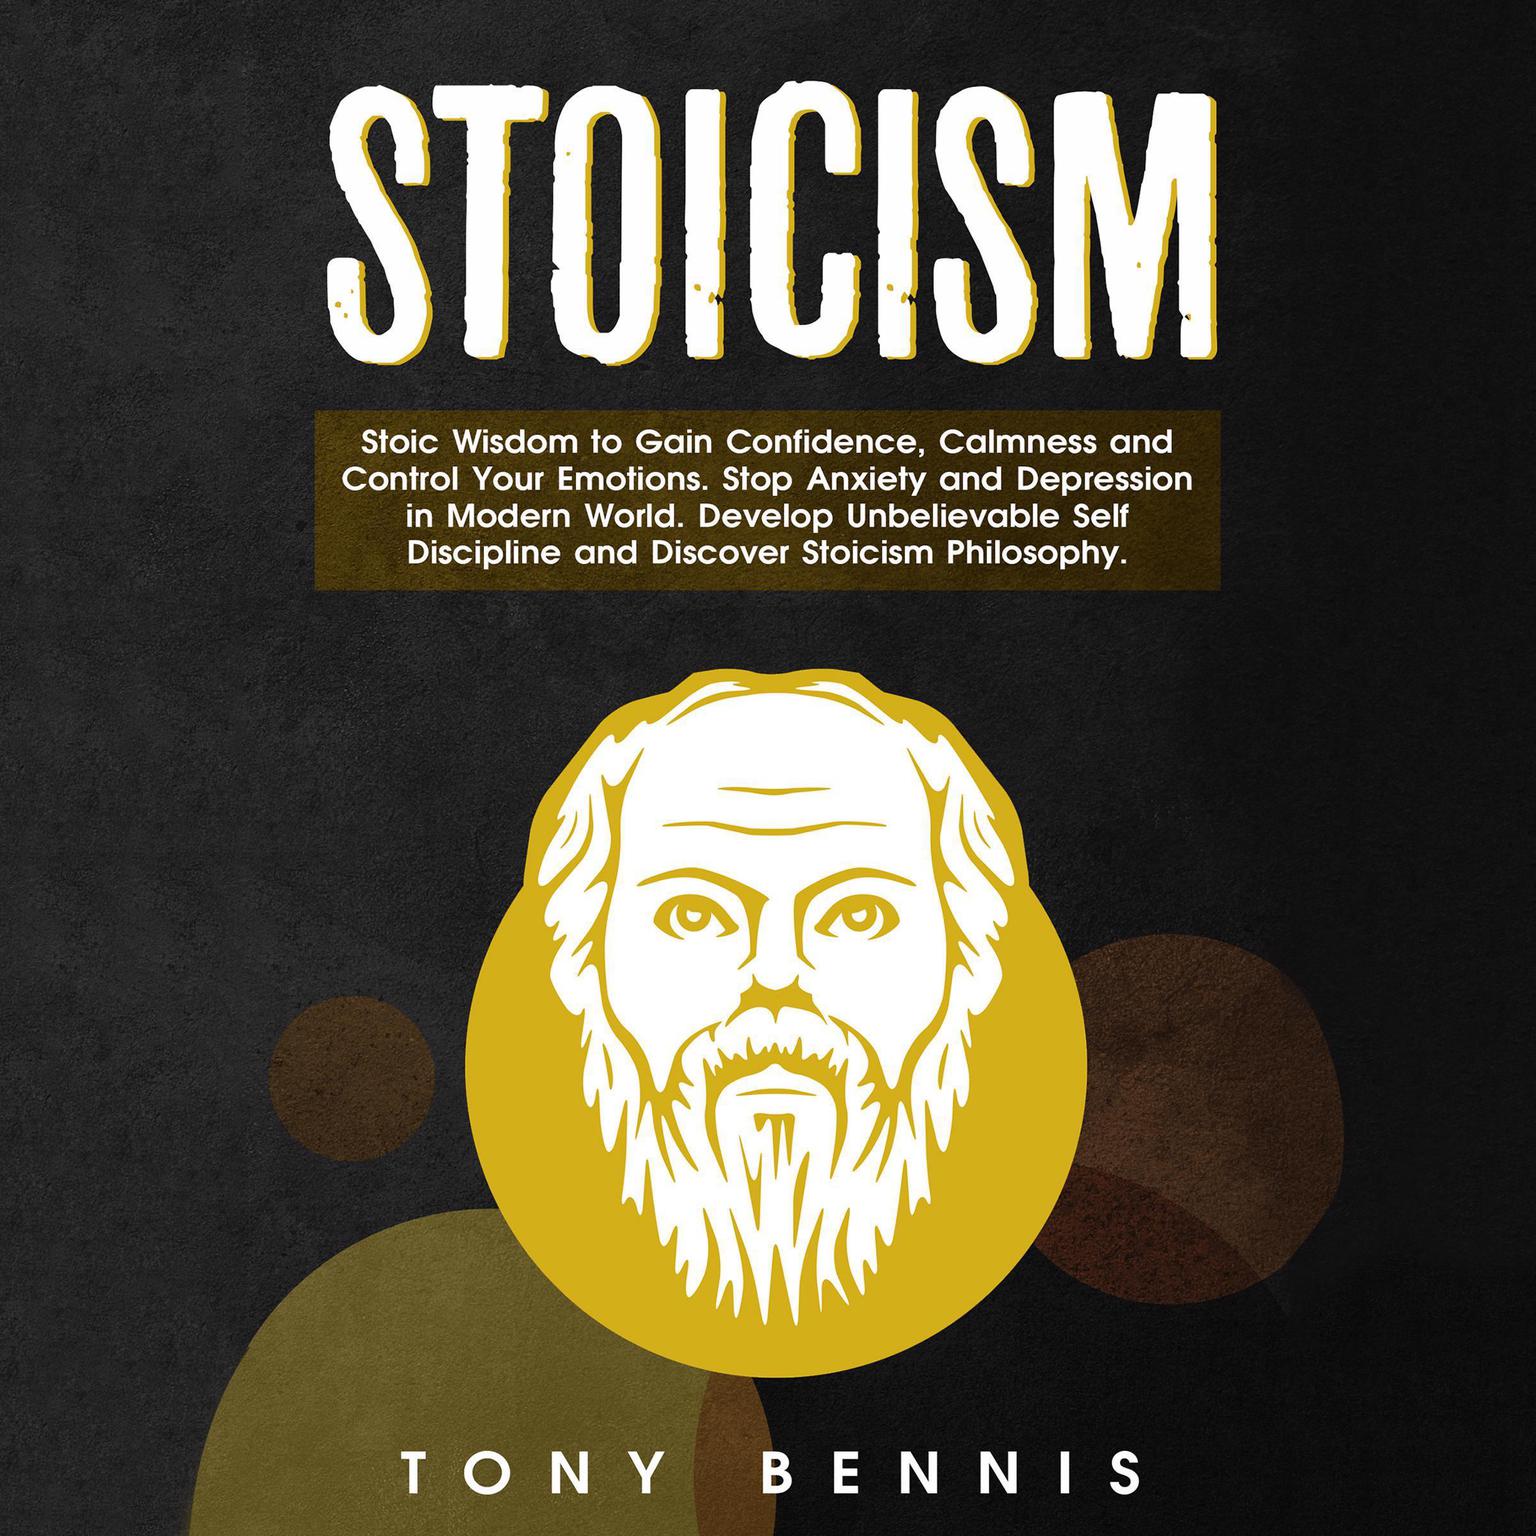 Stoicism:: Stoic Wisdom to Gain Confidence, Calmness and Control Your Emotions. Stop Anxiety and Depression in Modern World. Develop Unbelievable Self Discipline and Discover Stoicism Philosophy. Audiobook, by Tony Bennis